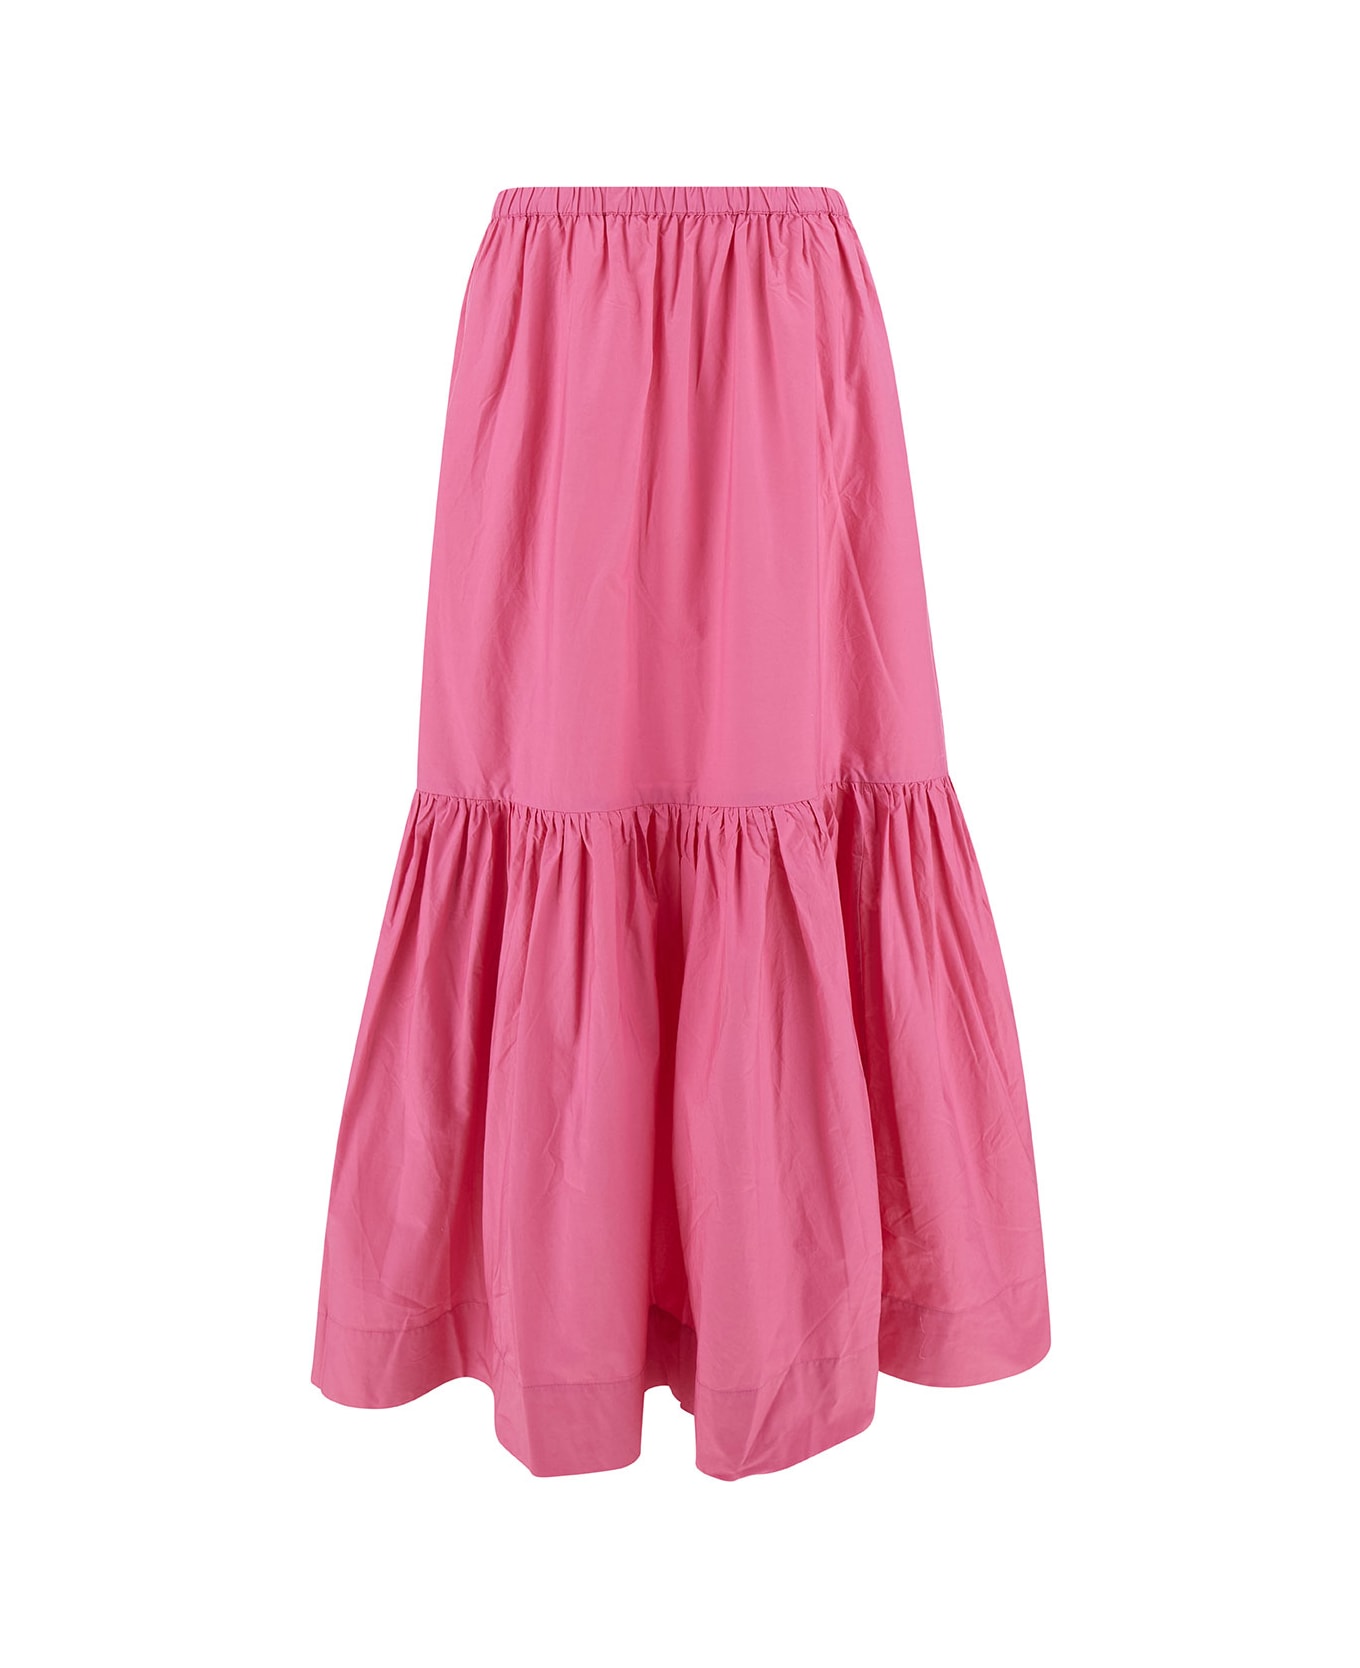 Ganni Long Pink Skirt With Flounce Detail In Cotton Woman - Pink